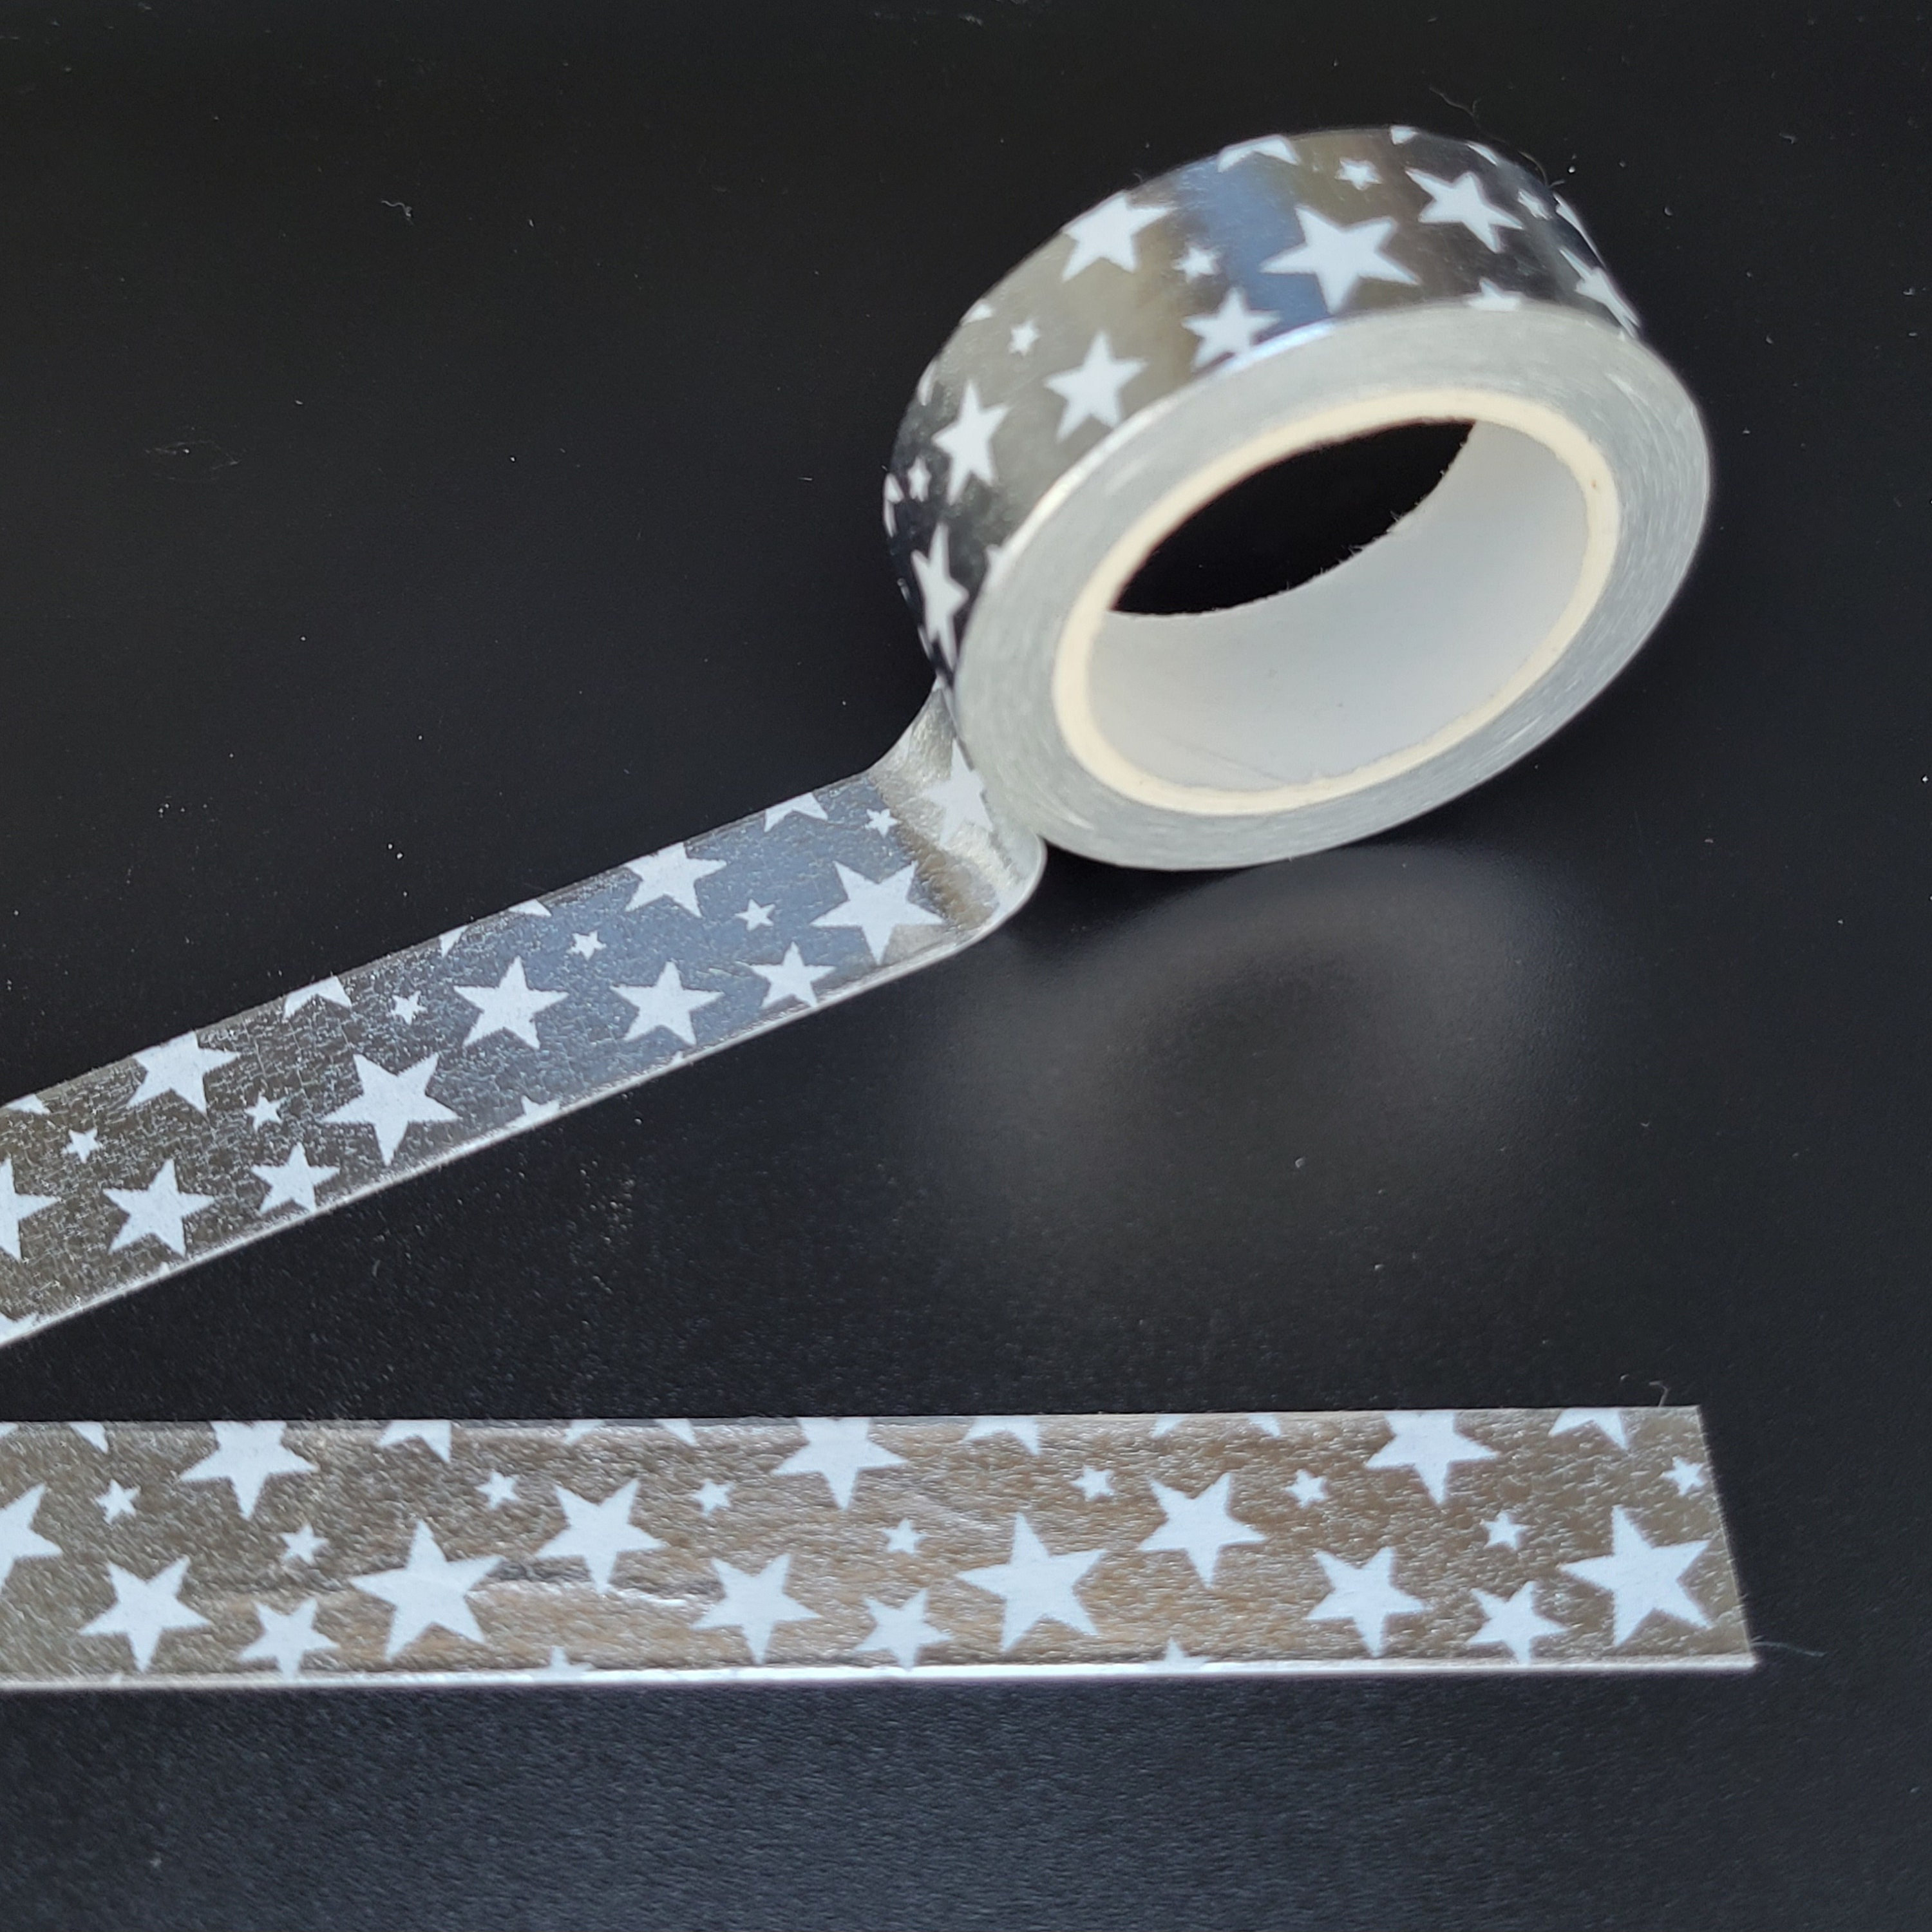 Set of 10 Washi Tape, Silver Foiled Set, Silver Accent Stars, Hearts, 8mm  X2m Each Roll, Thin Washi Tape Set, Junk Journal, Scrapbooking, 